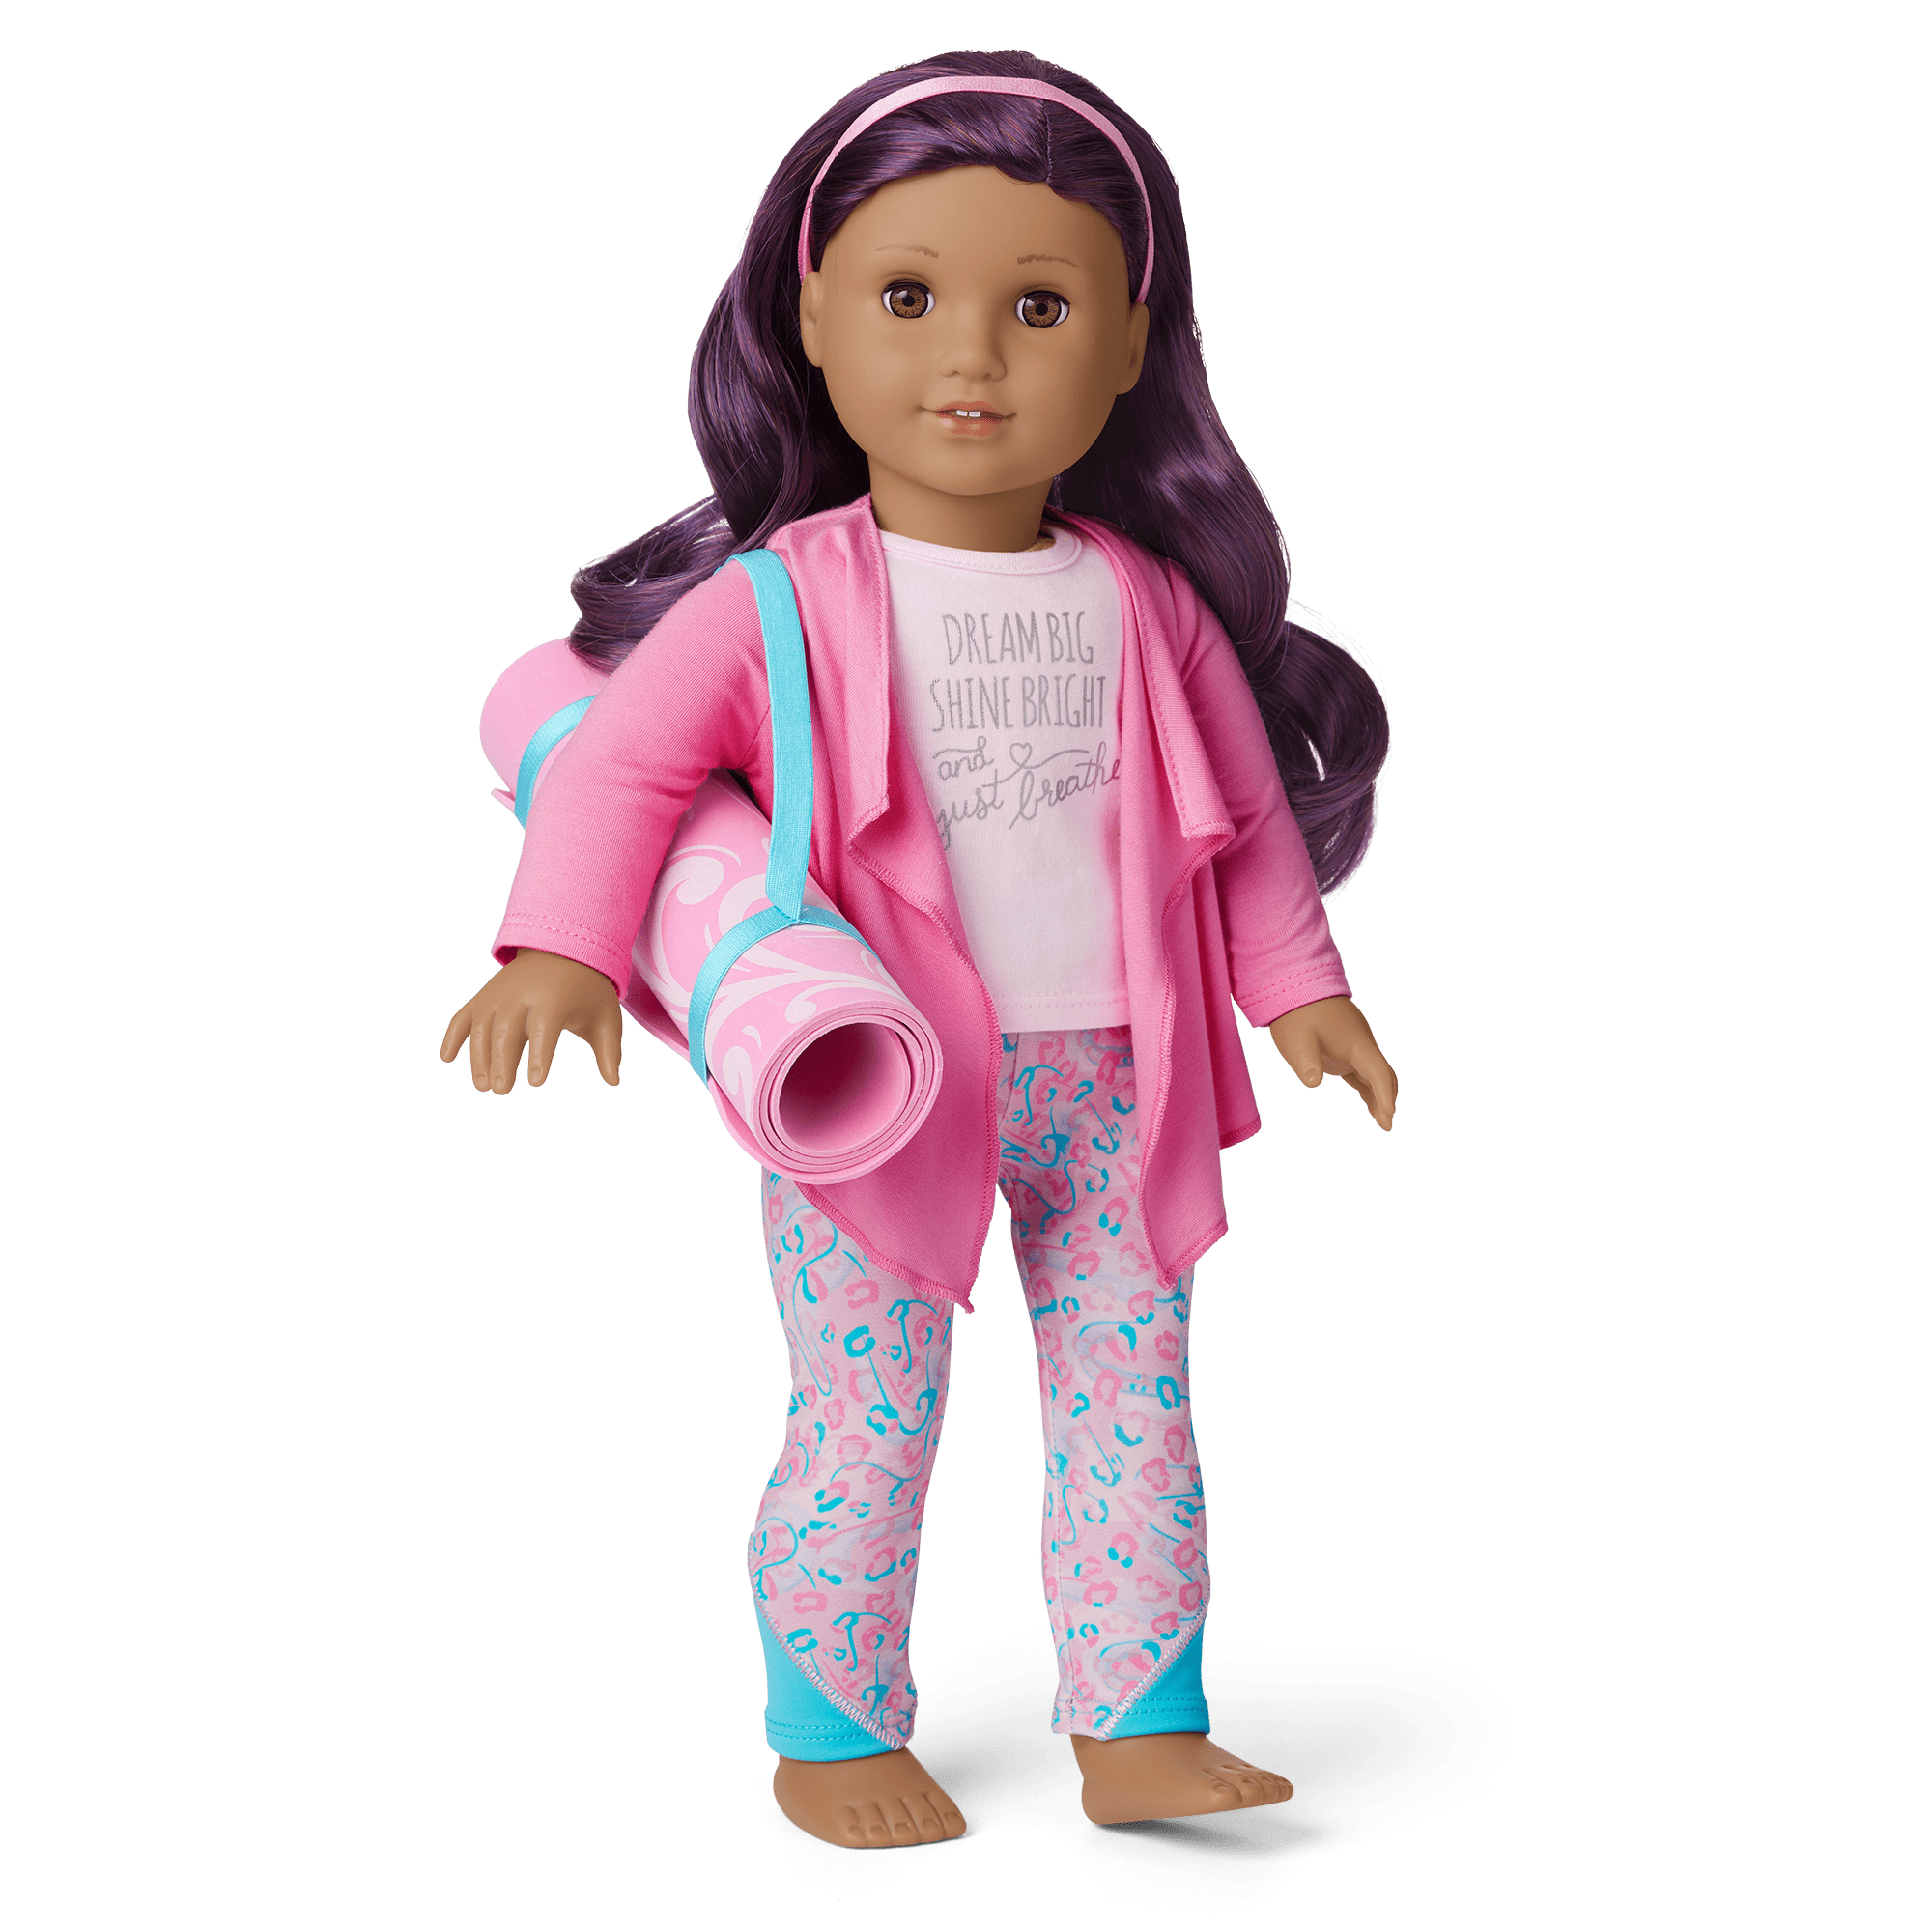 ZITA ELEMENT American 18 Inch Girl Doll Yoga Clothes and